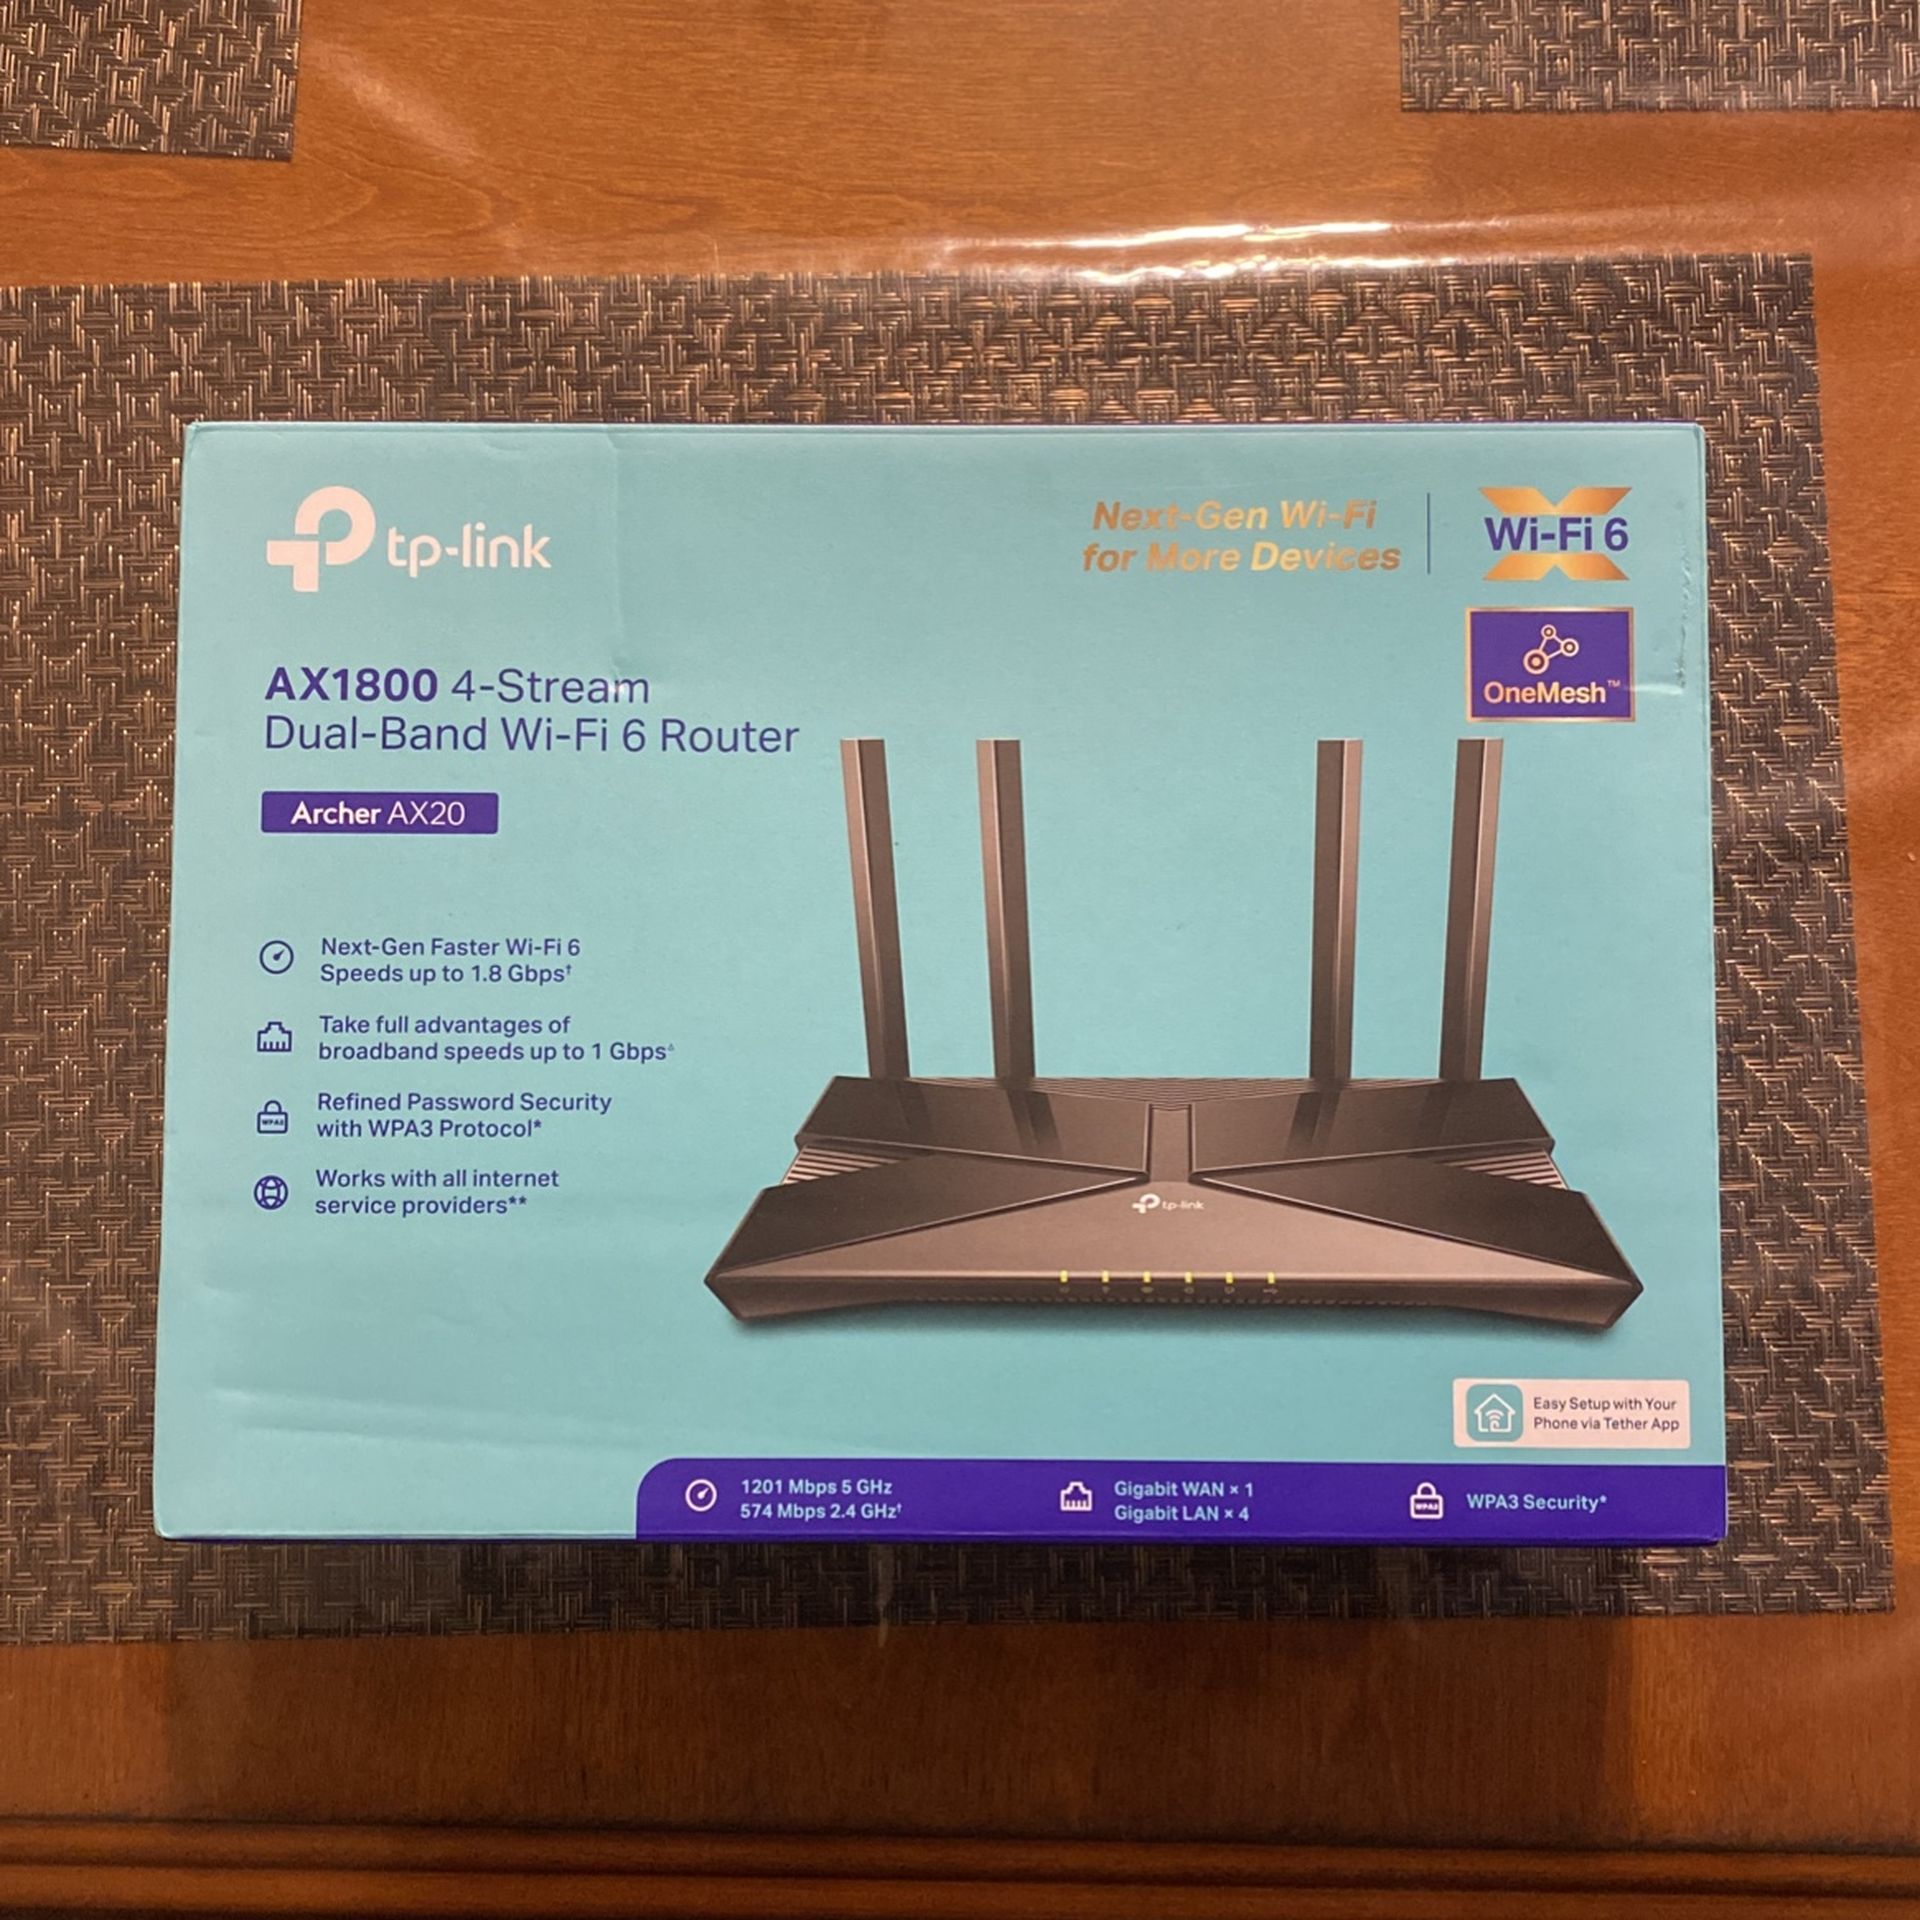 Ax1800 4-Stream Dual - Band Wi-Fi 6 Router